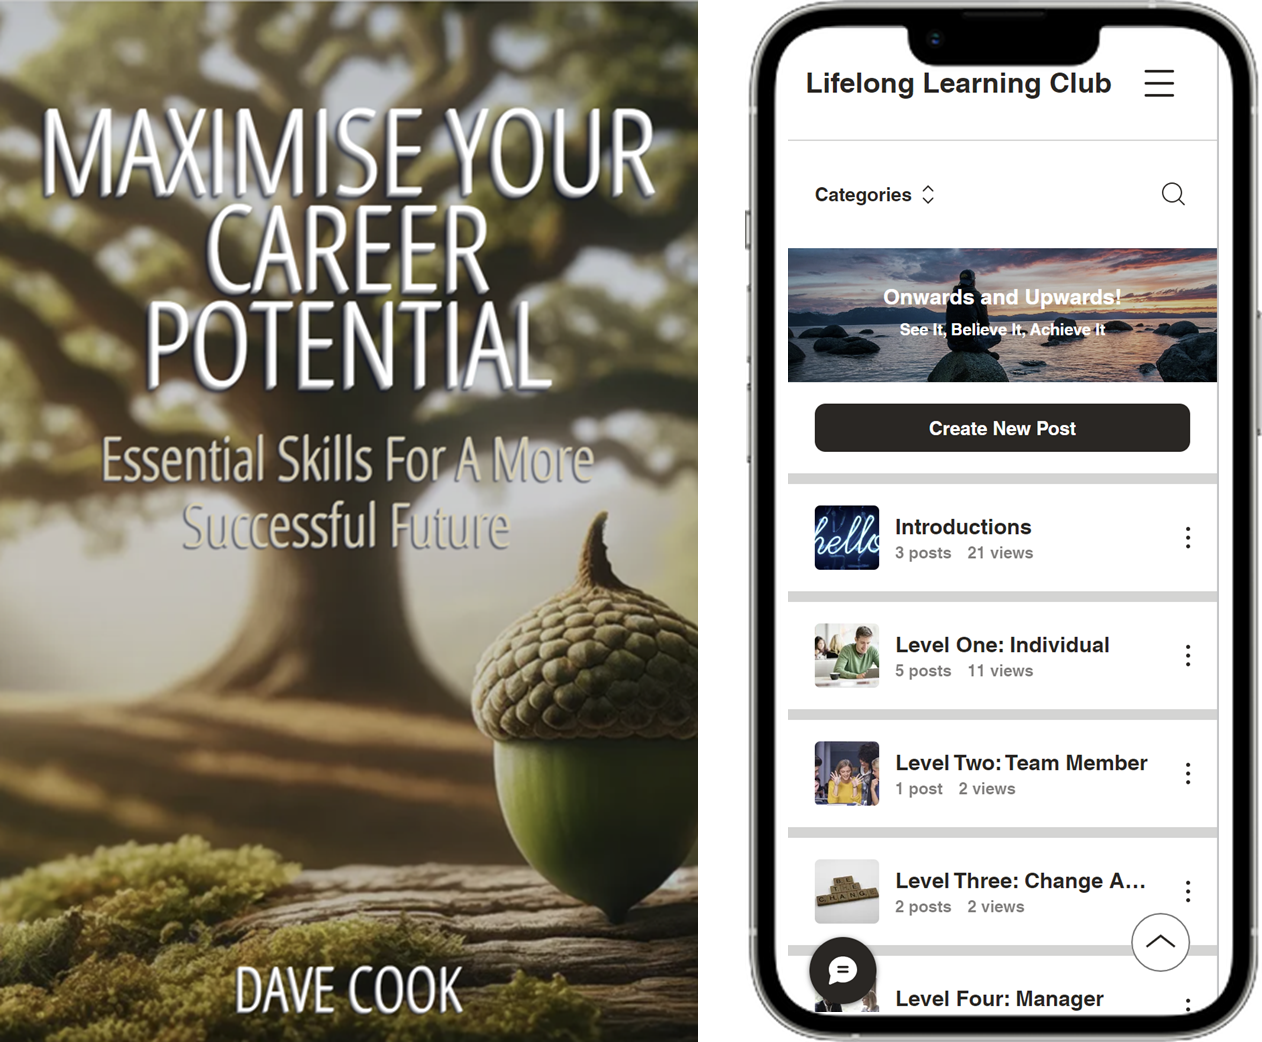 Dave Cook Announces the Launch of "Maximise Your Career Potential" and the Lifelong Learning Club